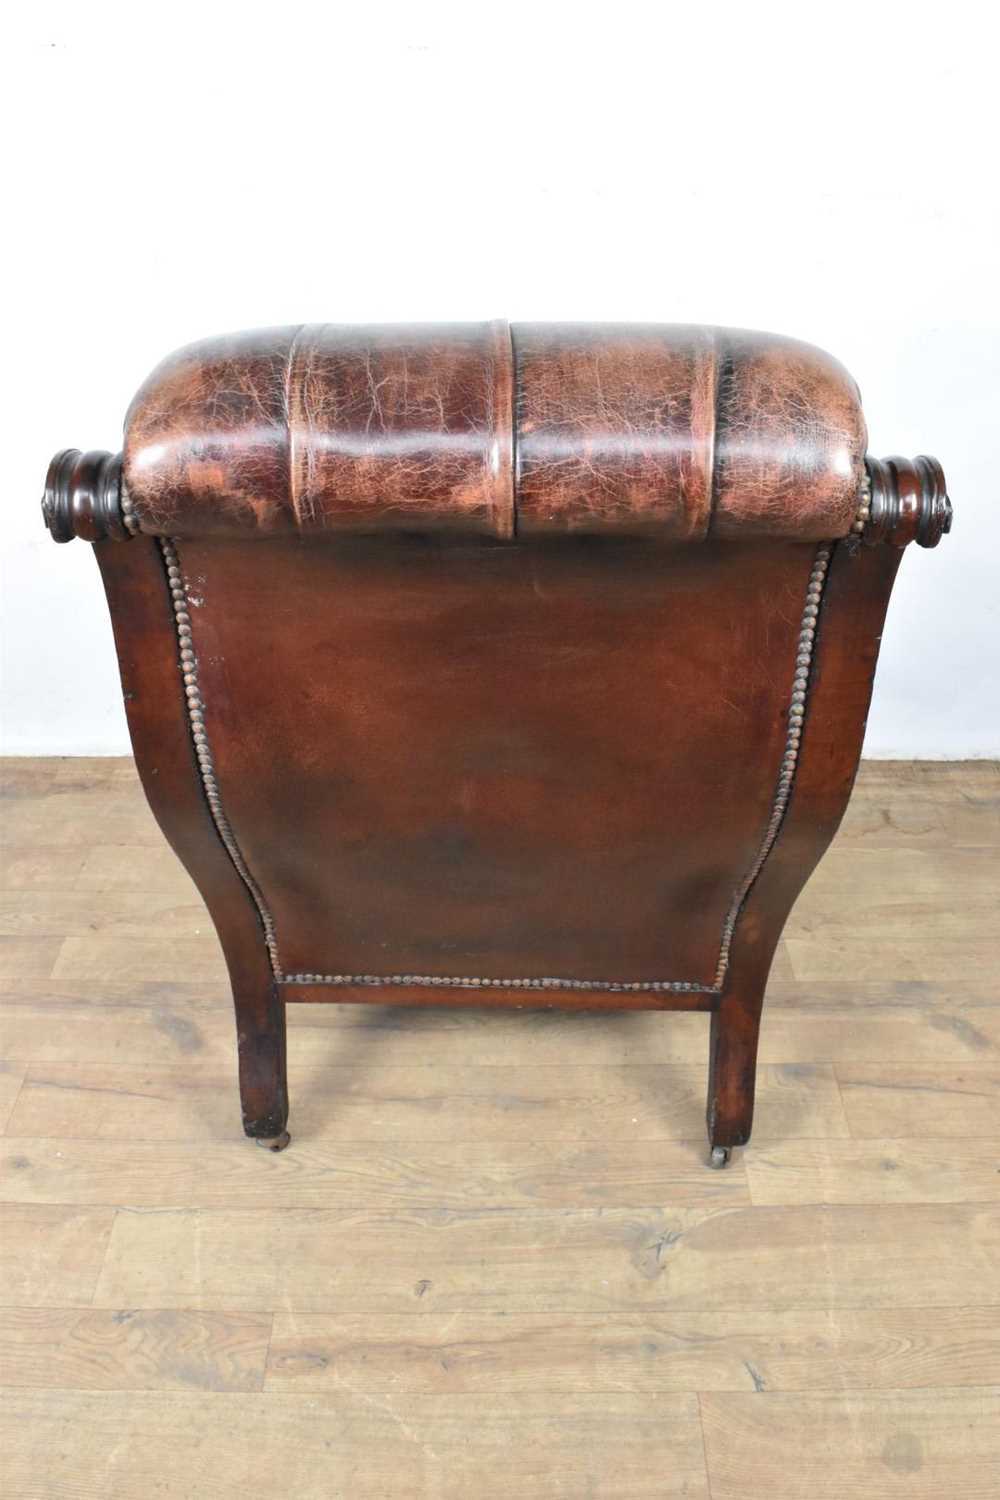 Good George IV button leather upholstered library chair - Image 6 of 6